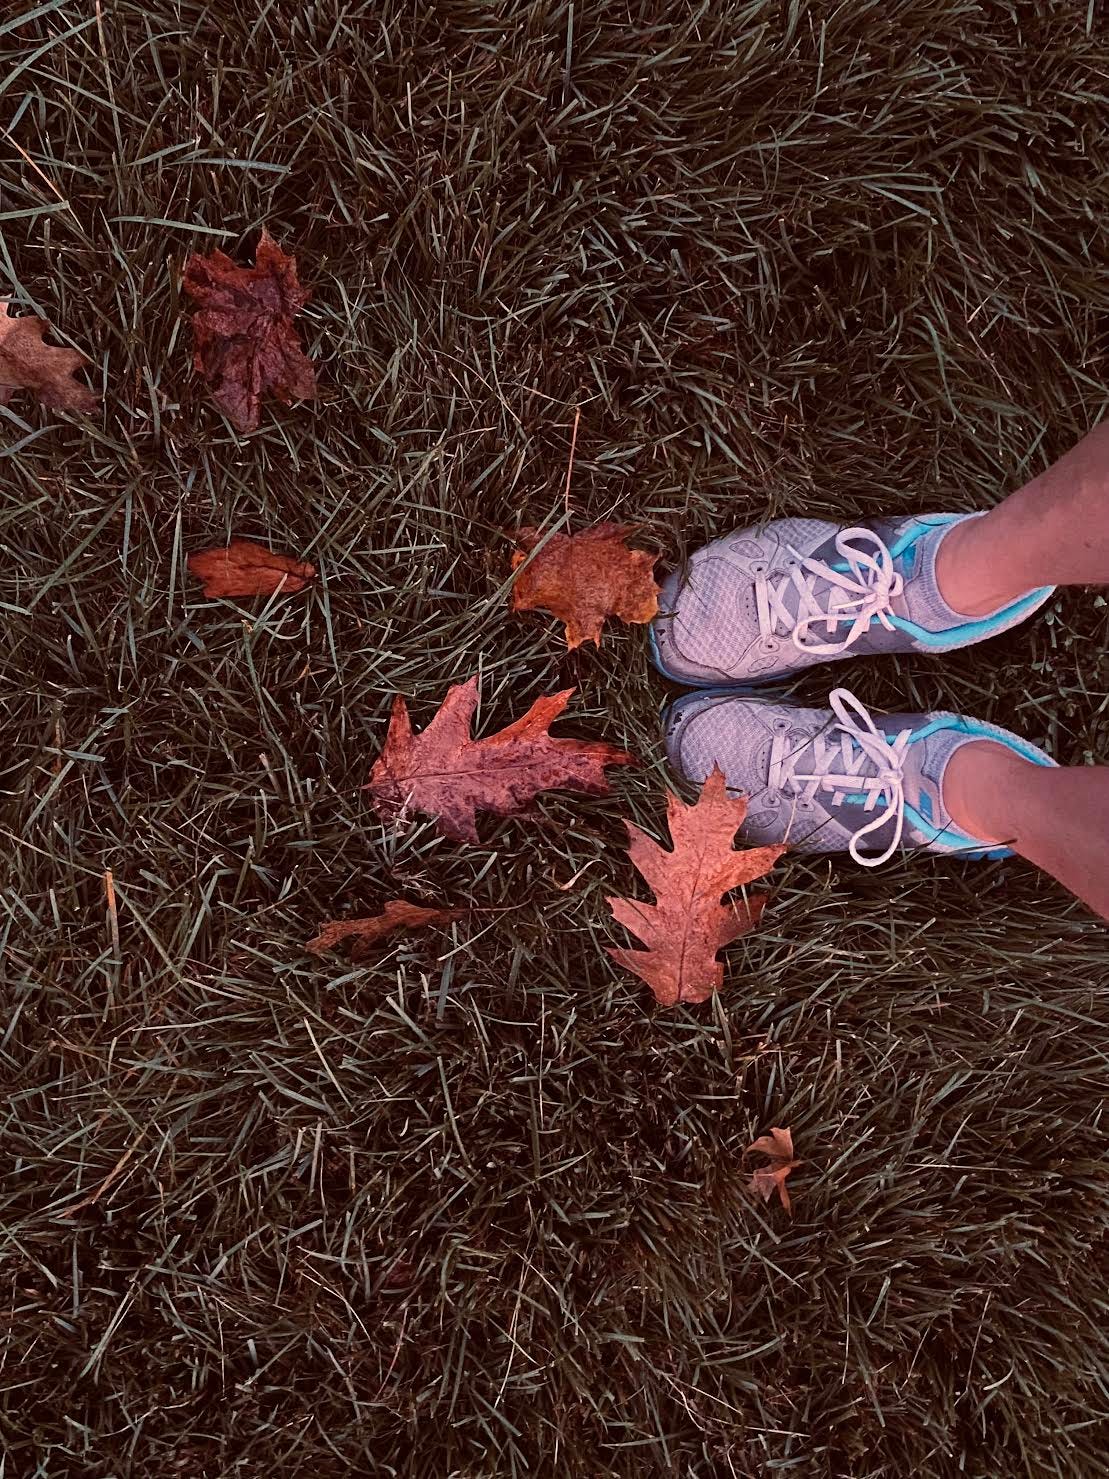 blue and gray sneakers on dark green grass with brown fallen leaves scattered about